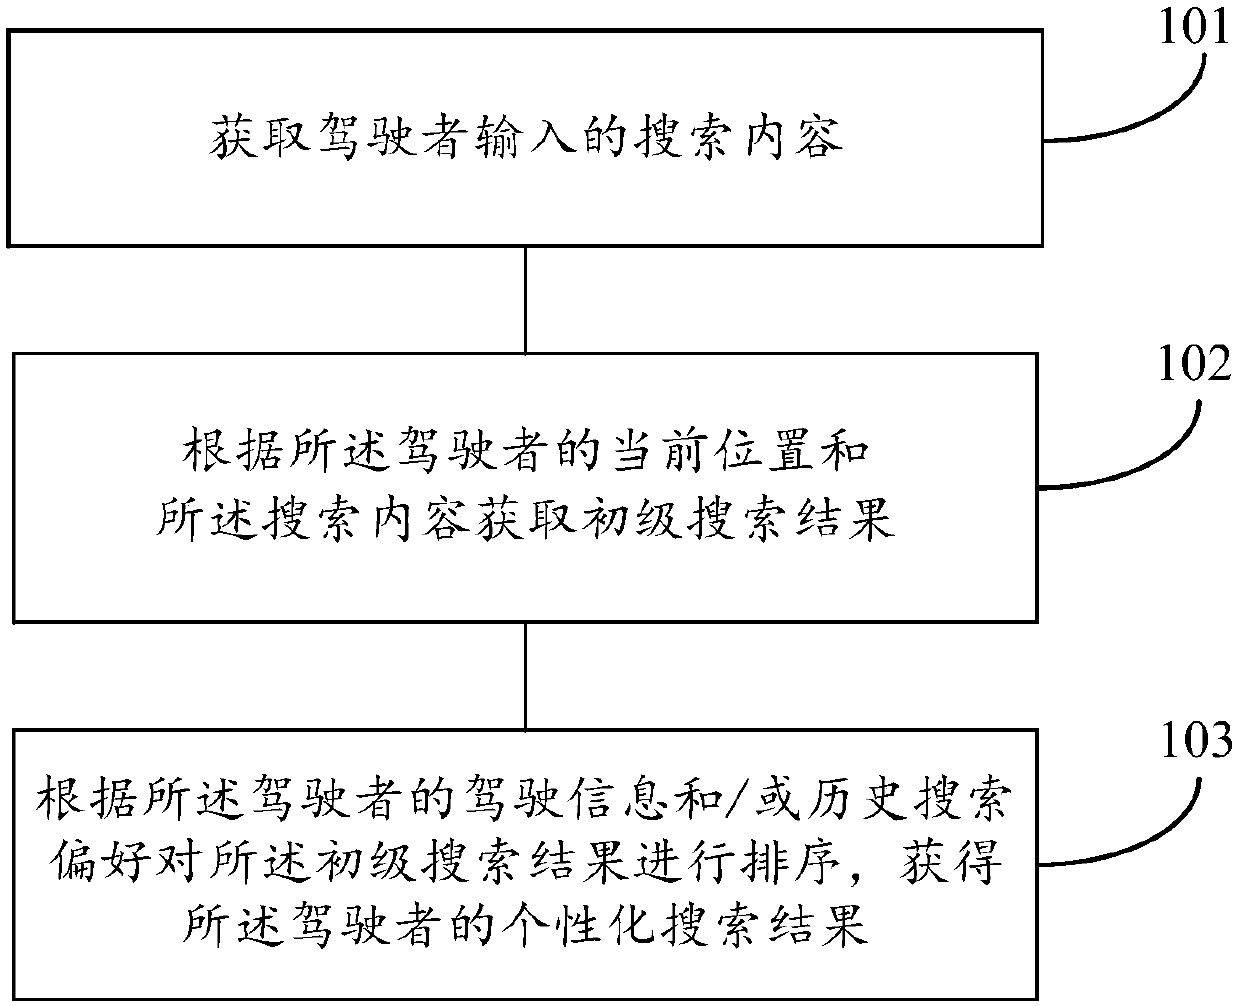 Automobile data-based LBS (location based service) searching and sequencing method and device